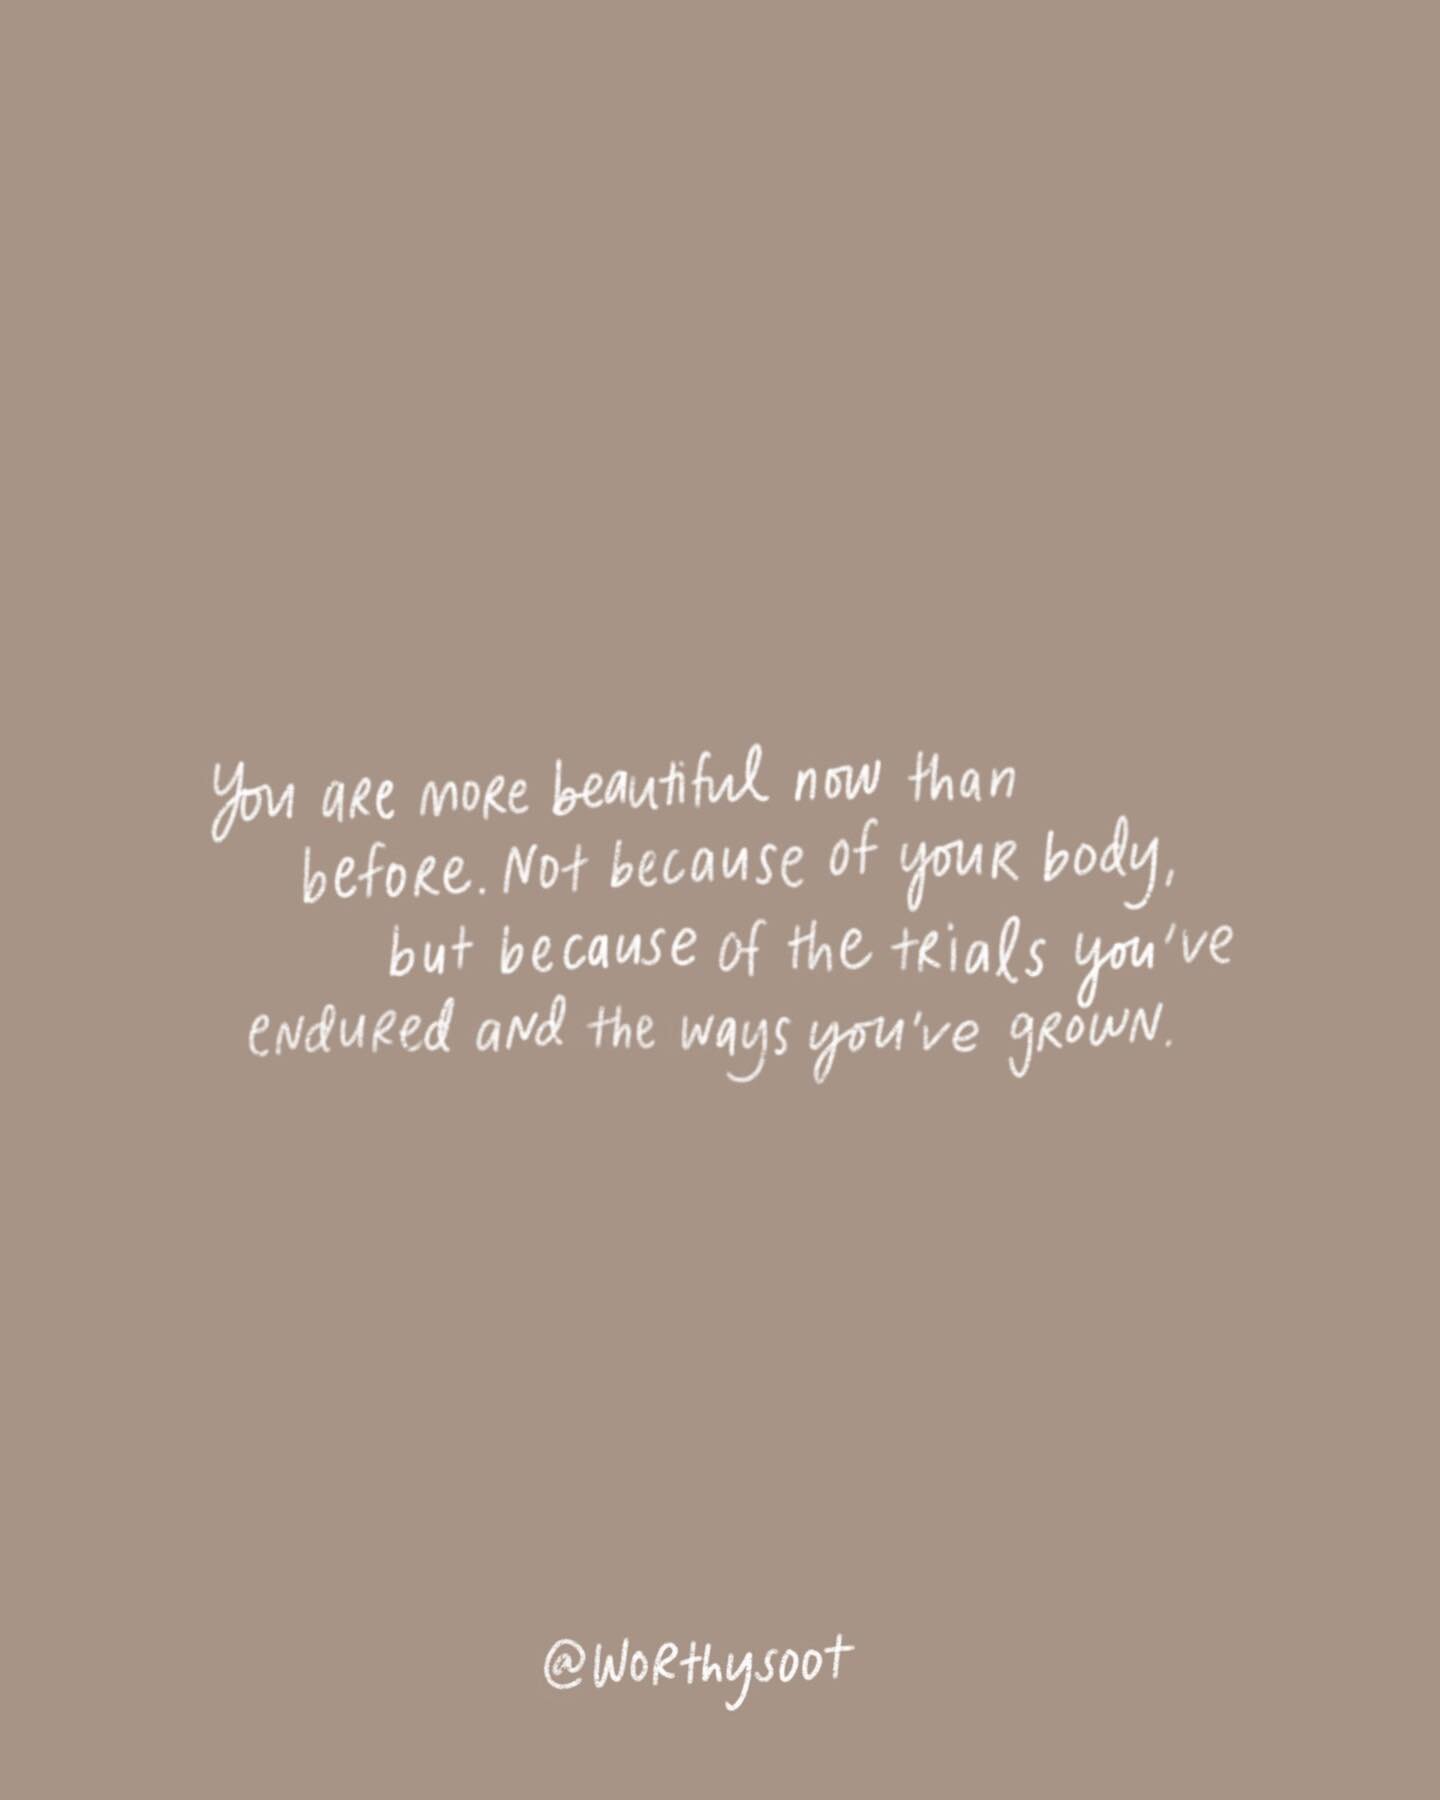 It&rsquo;s not your curves. Or the gold speckles in your eyes. Or the curls of your hair. Or the picture perfect skin. Or the kind smile. Or the toned legs. Or the winged eyeliner.

It&rsquo;s not your body that reveals your true beauty.

It&rsquo;s 